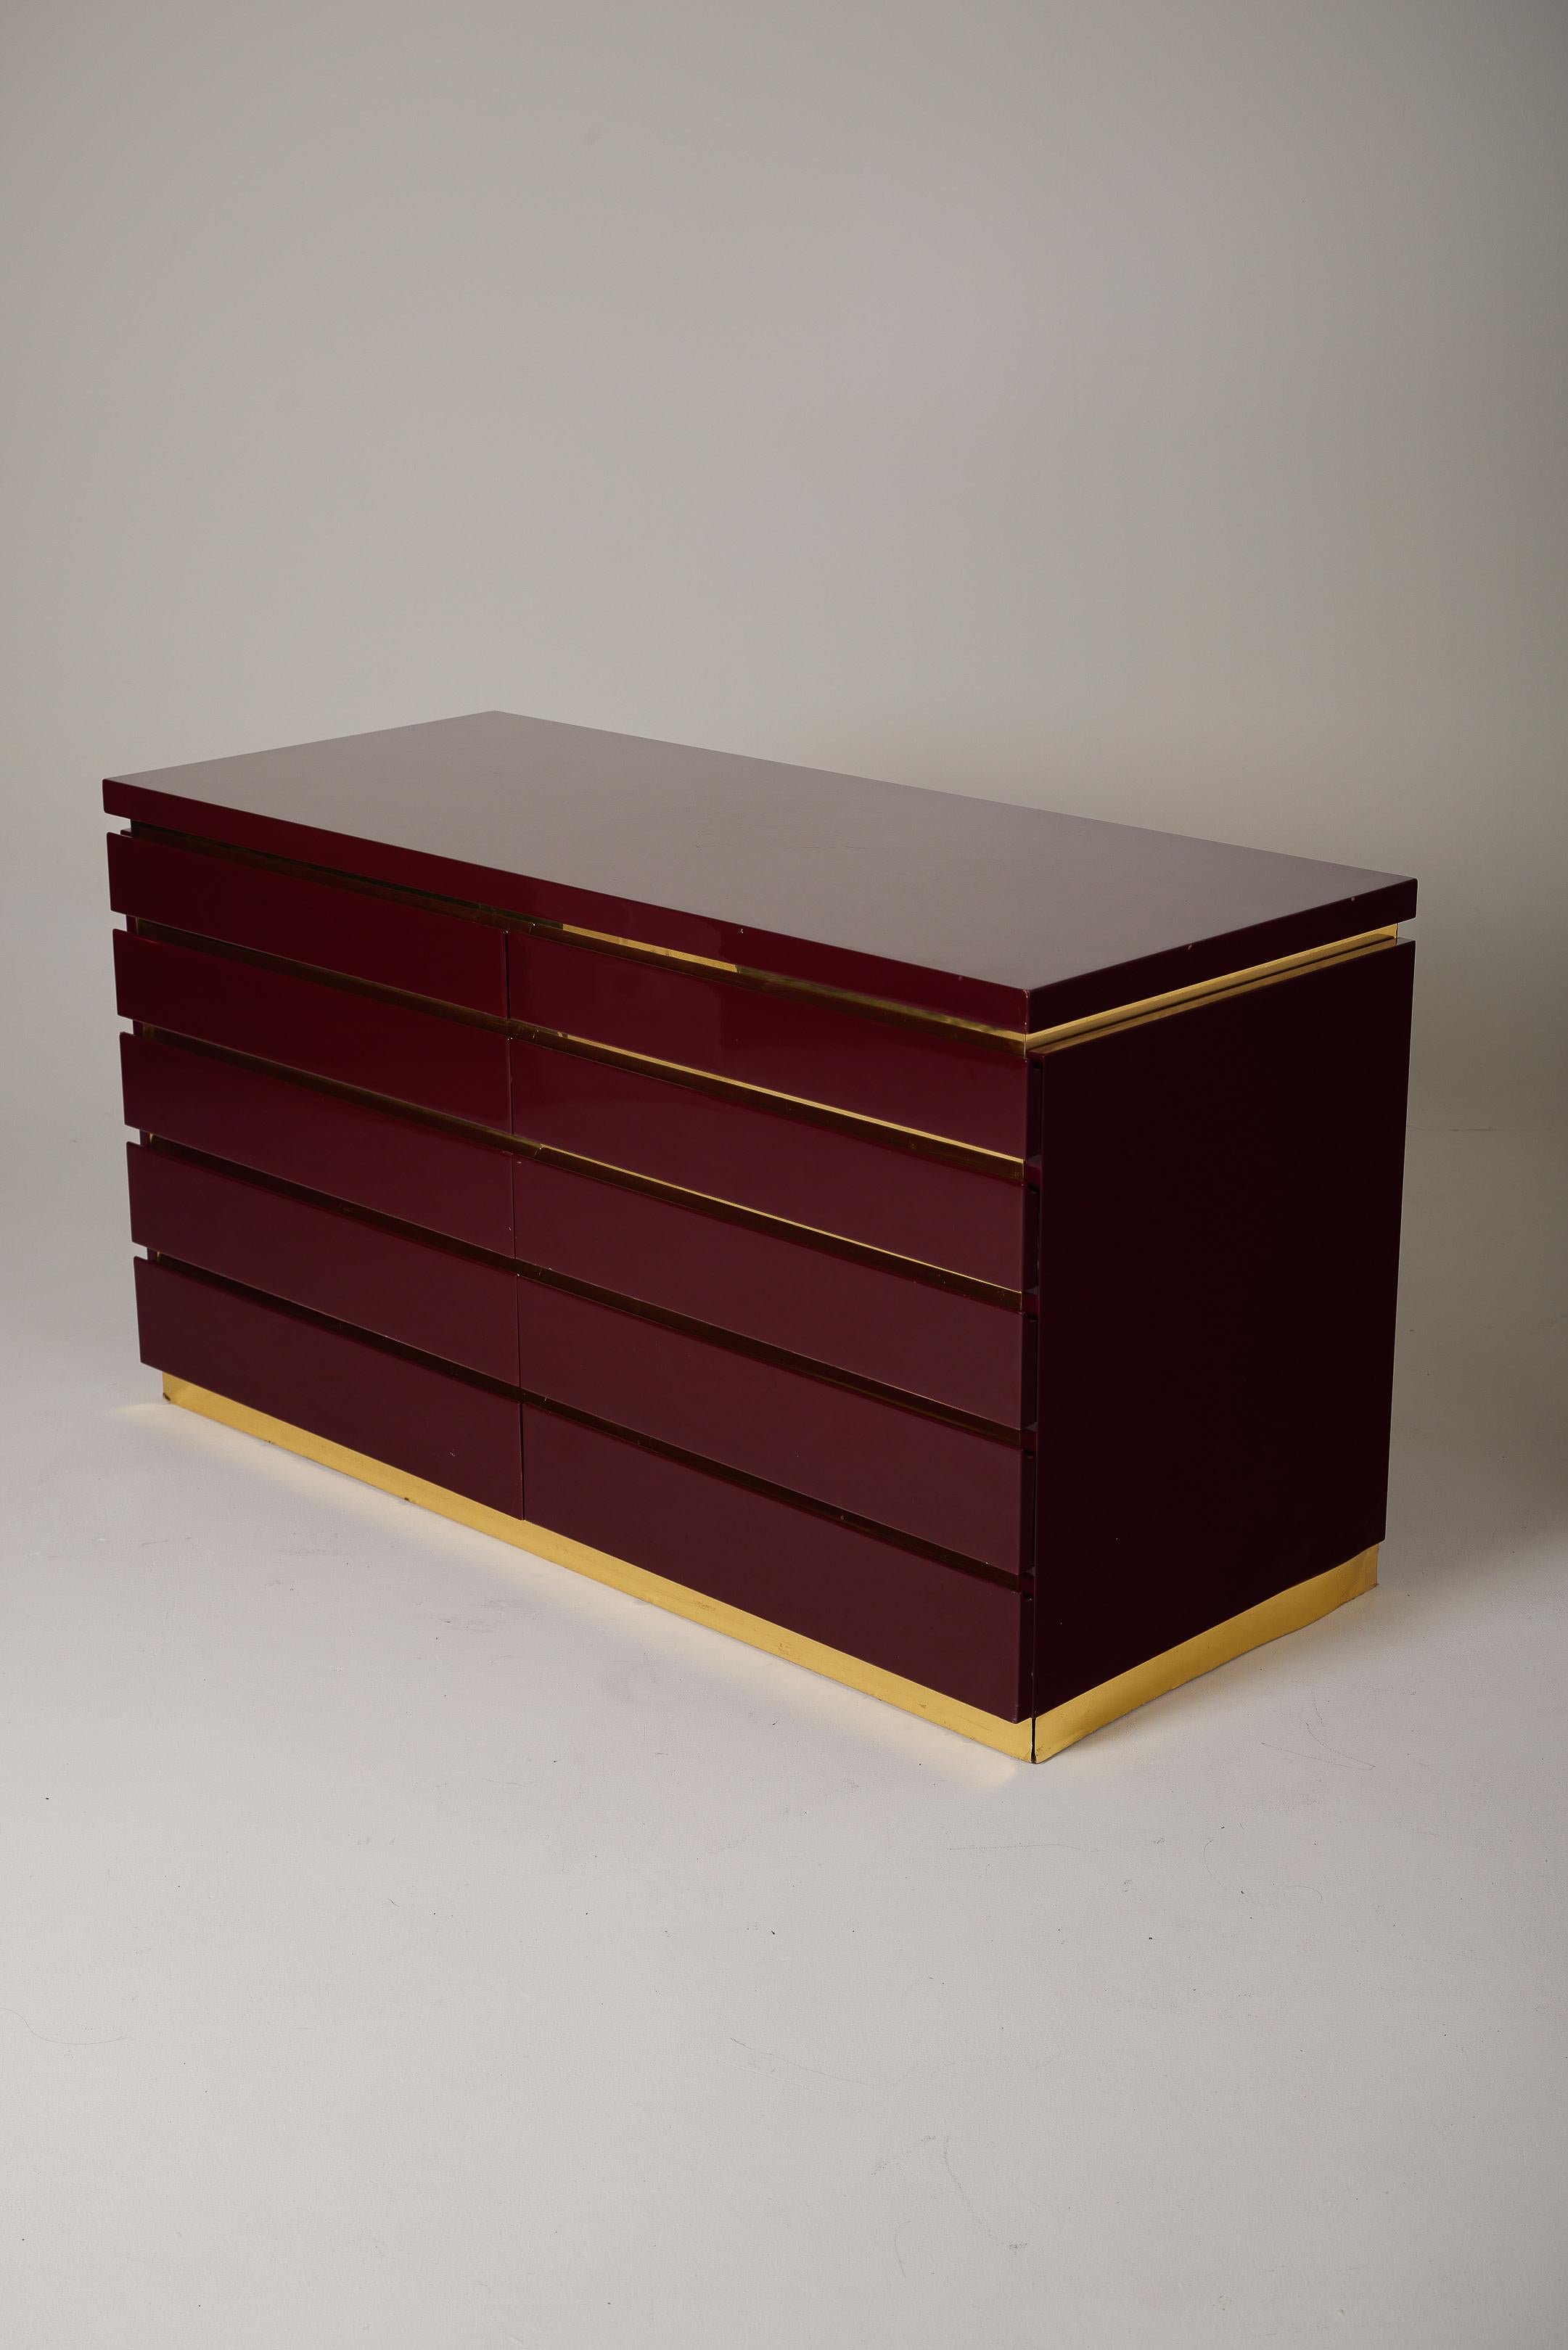  Chest of drawers by French designer Jean-Claude Mahey (1994-) dating from the 1970s. Chest in burgundy red lacquered wood and gilt brass, opening with two sets of five drawers. Very good condition.
LP3102